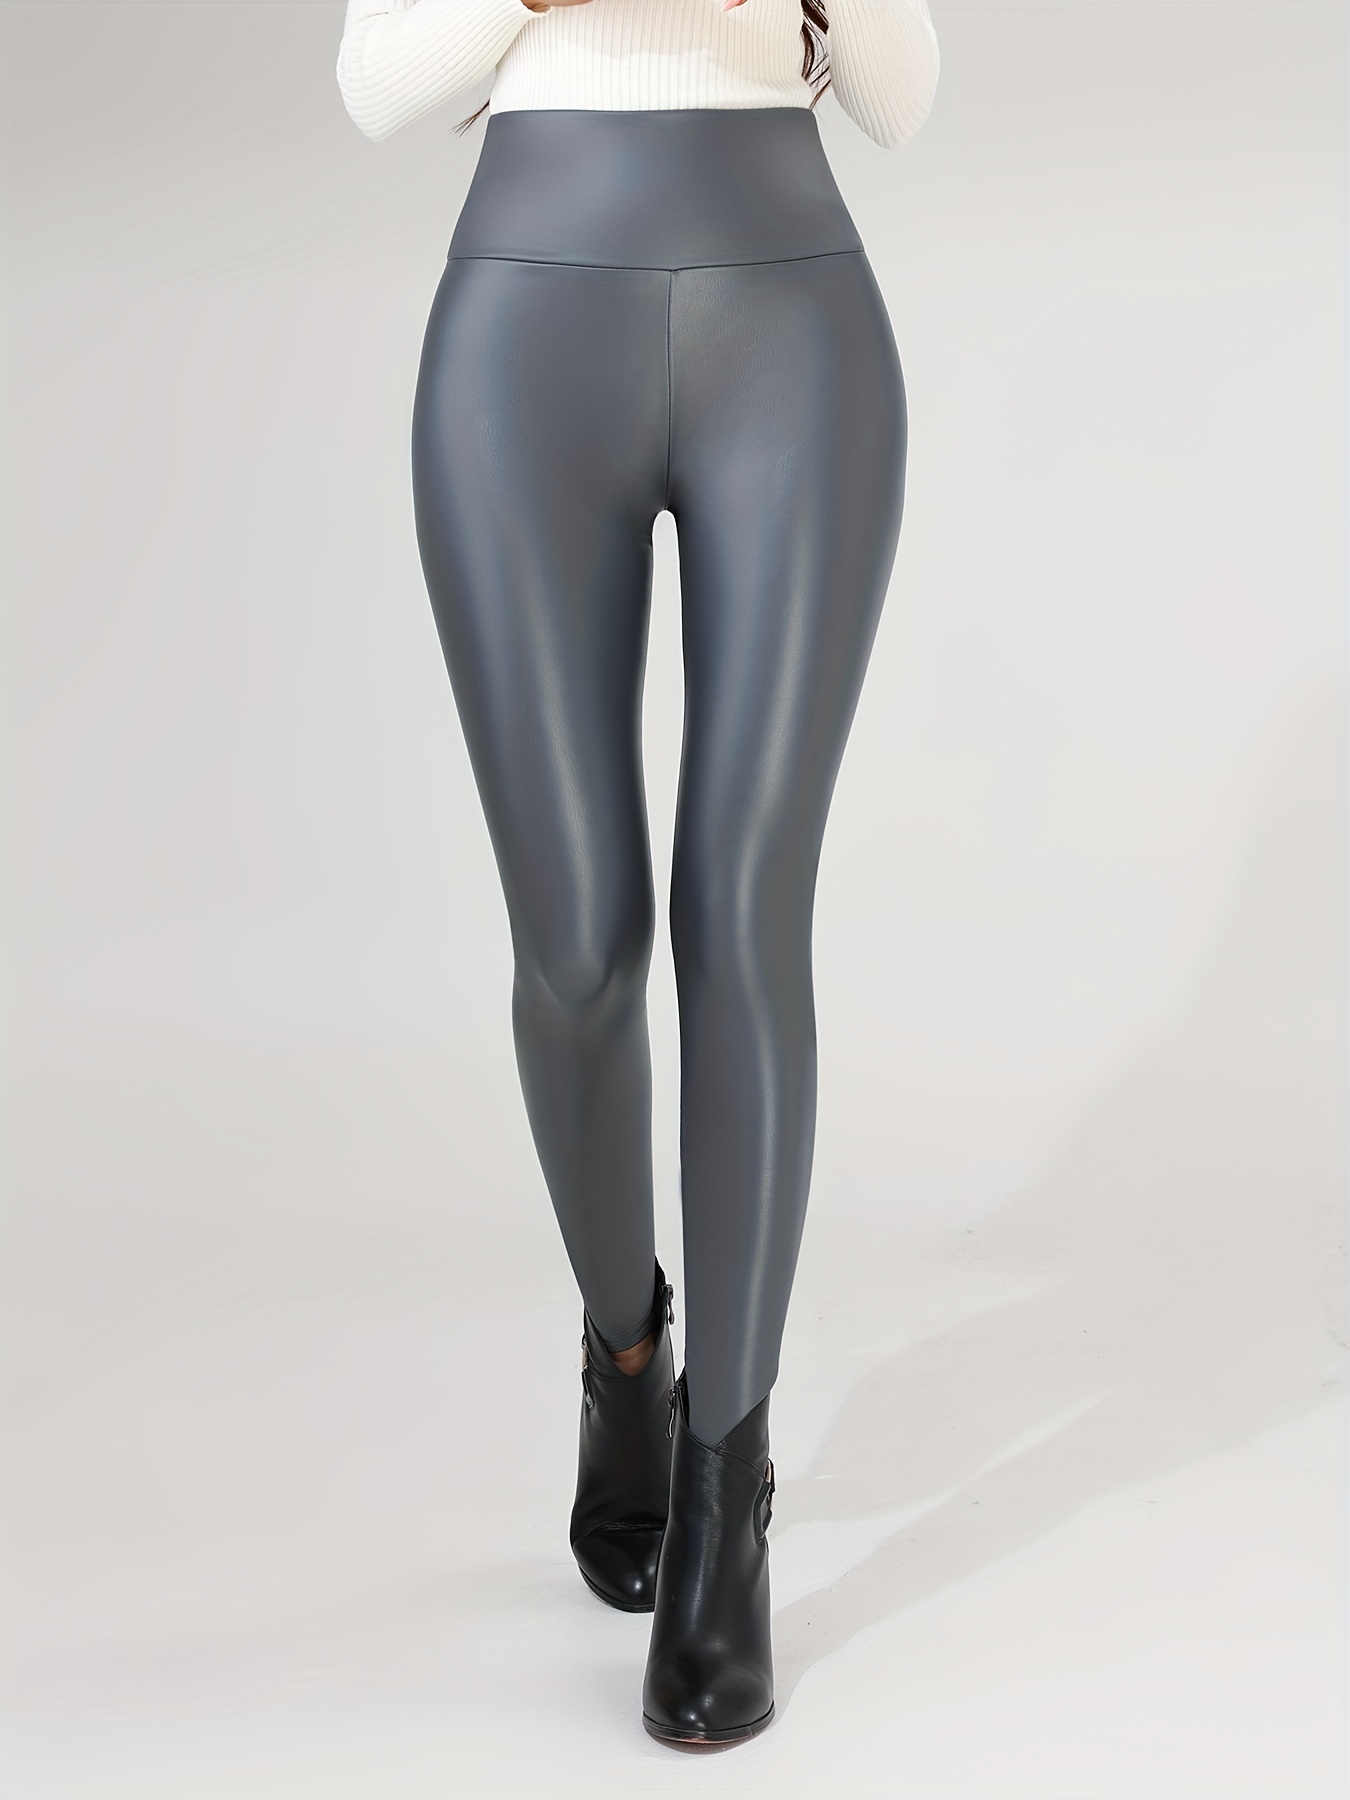 Laiseng Thermal Leggings Synthetic Leather Women High Waistband